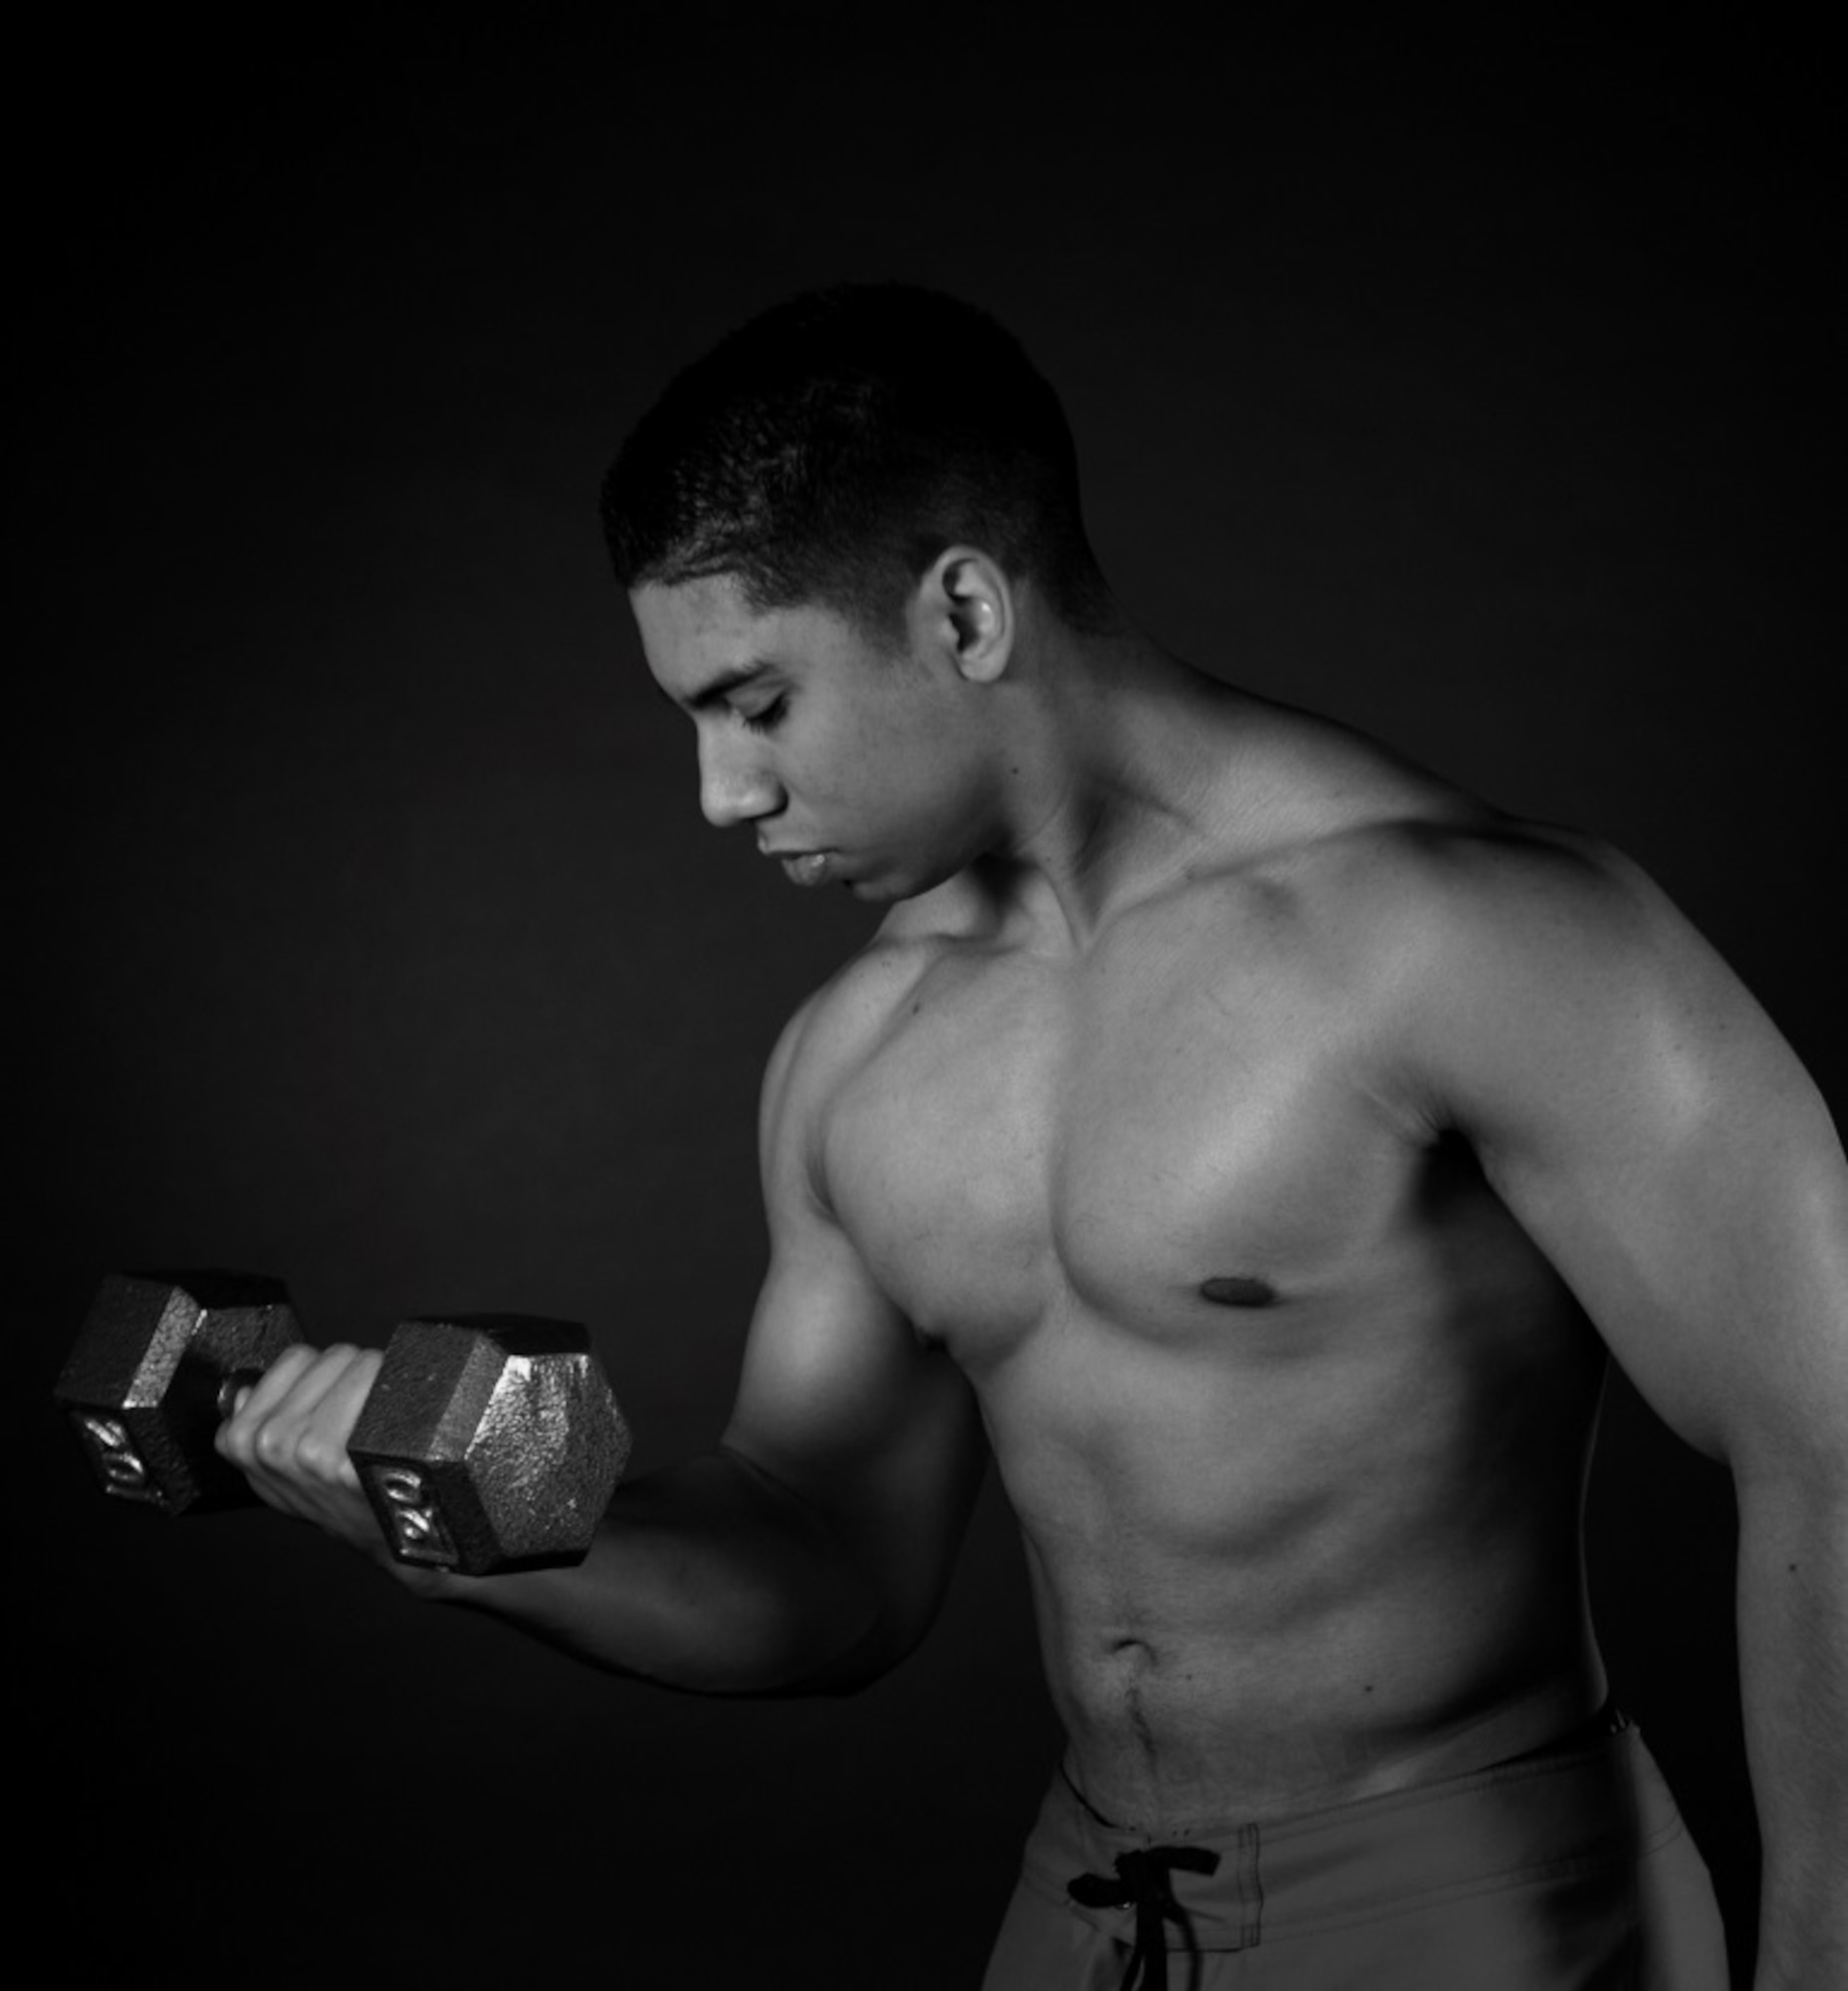 Senior Airman Miguel Amador, 5th Medical Group medical information service technician, lifts a dumbbell at Minot Air Force Base, N.D., Aug. 11, 2015. Amador competes in bodybuilding competitions and has finished as well as second place. (U.S. Air Force photo/Airman 1st Class Christian Sullivan)